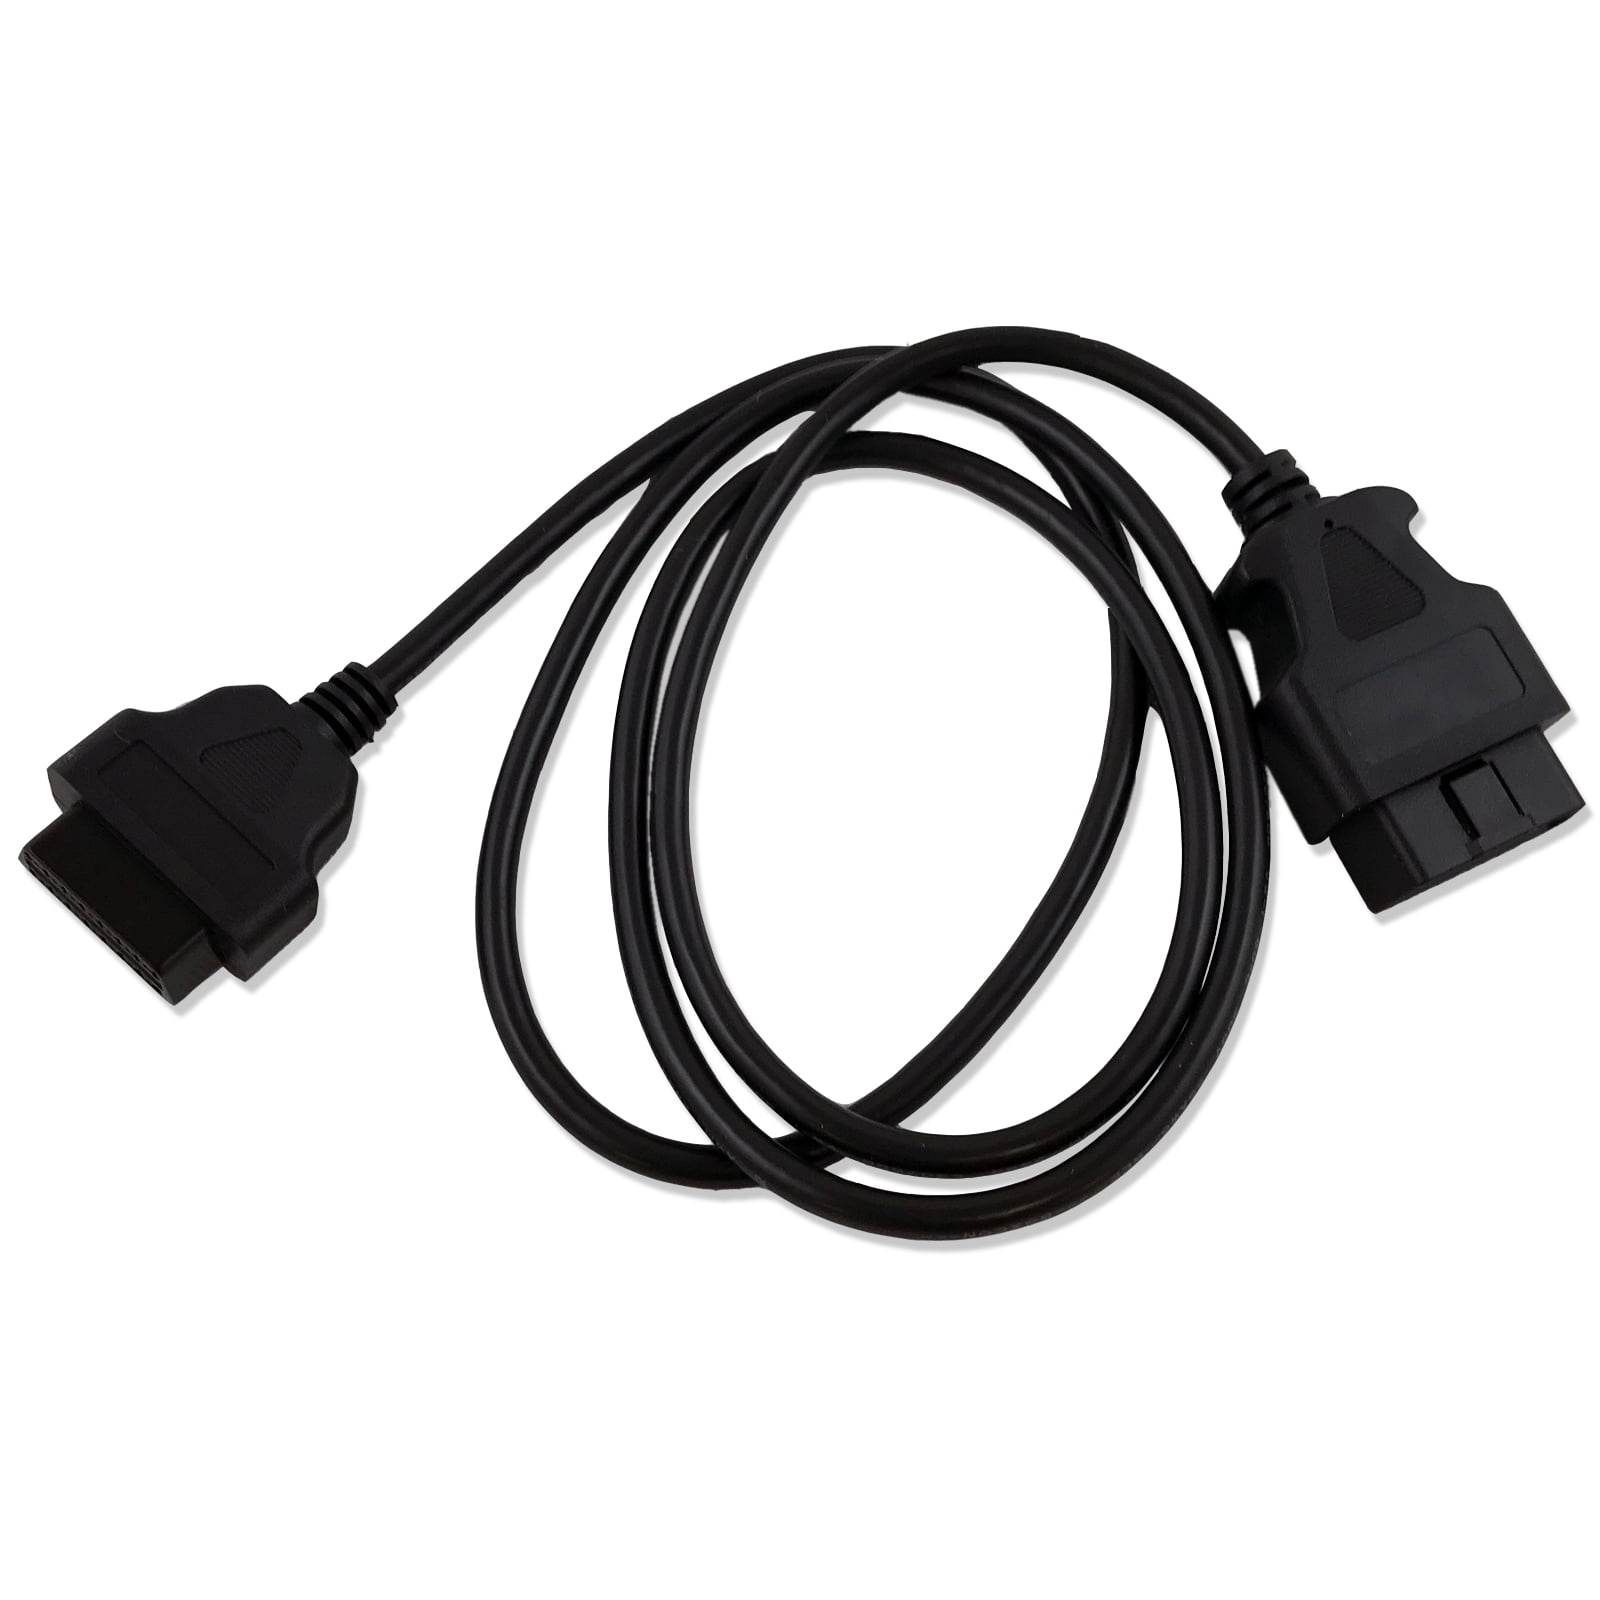 Auto 16Pin Male to Female OBD2 Extension Cable Diagnostic Adapter For elm327 